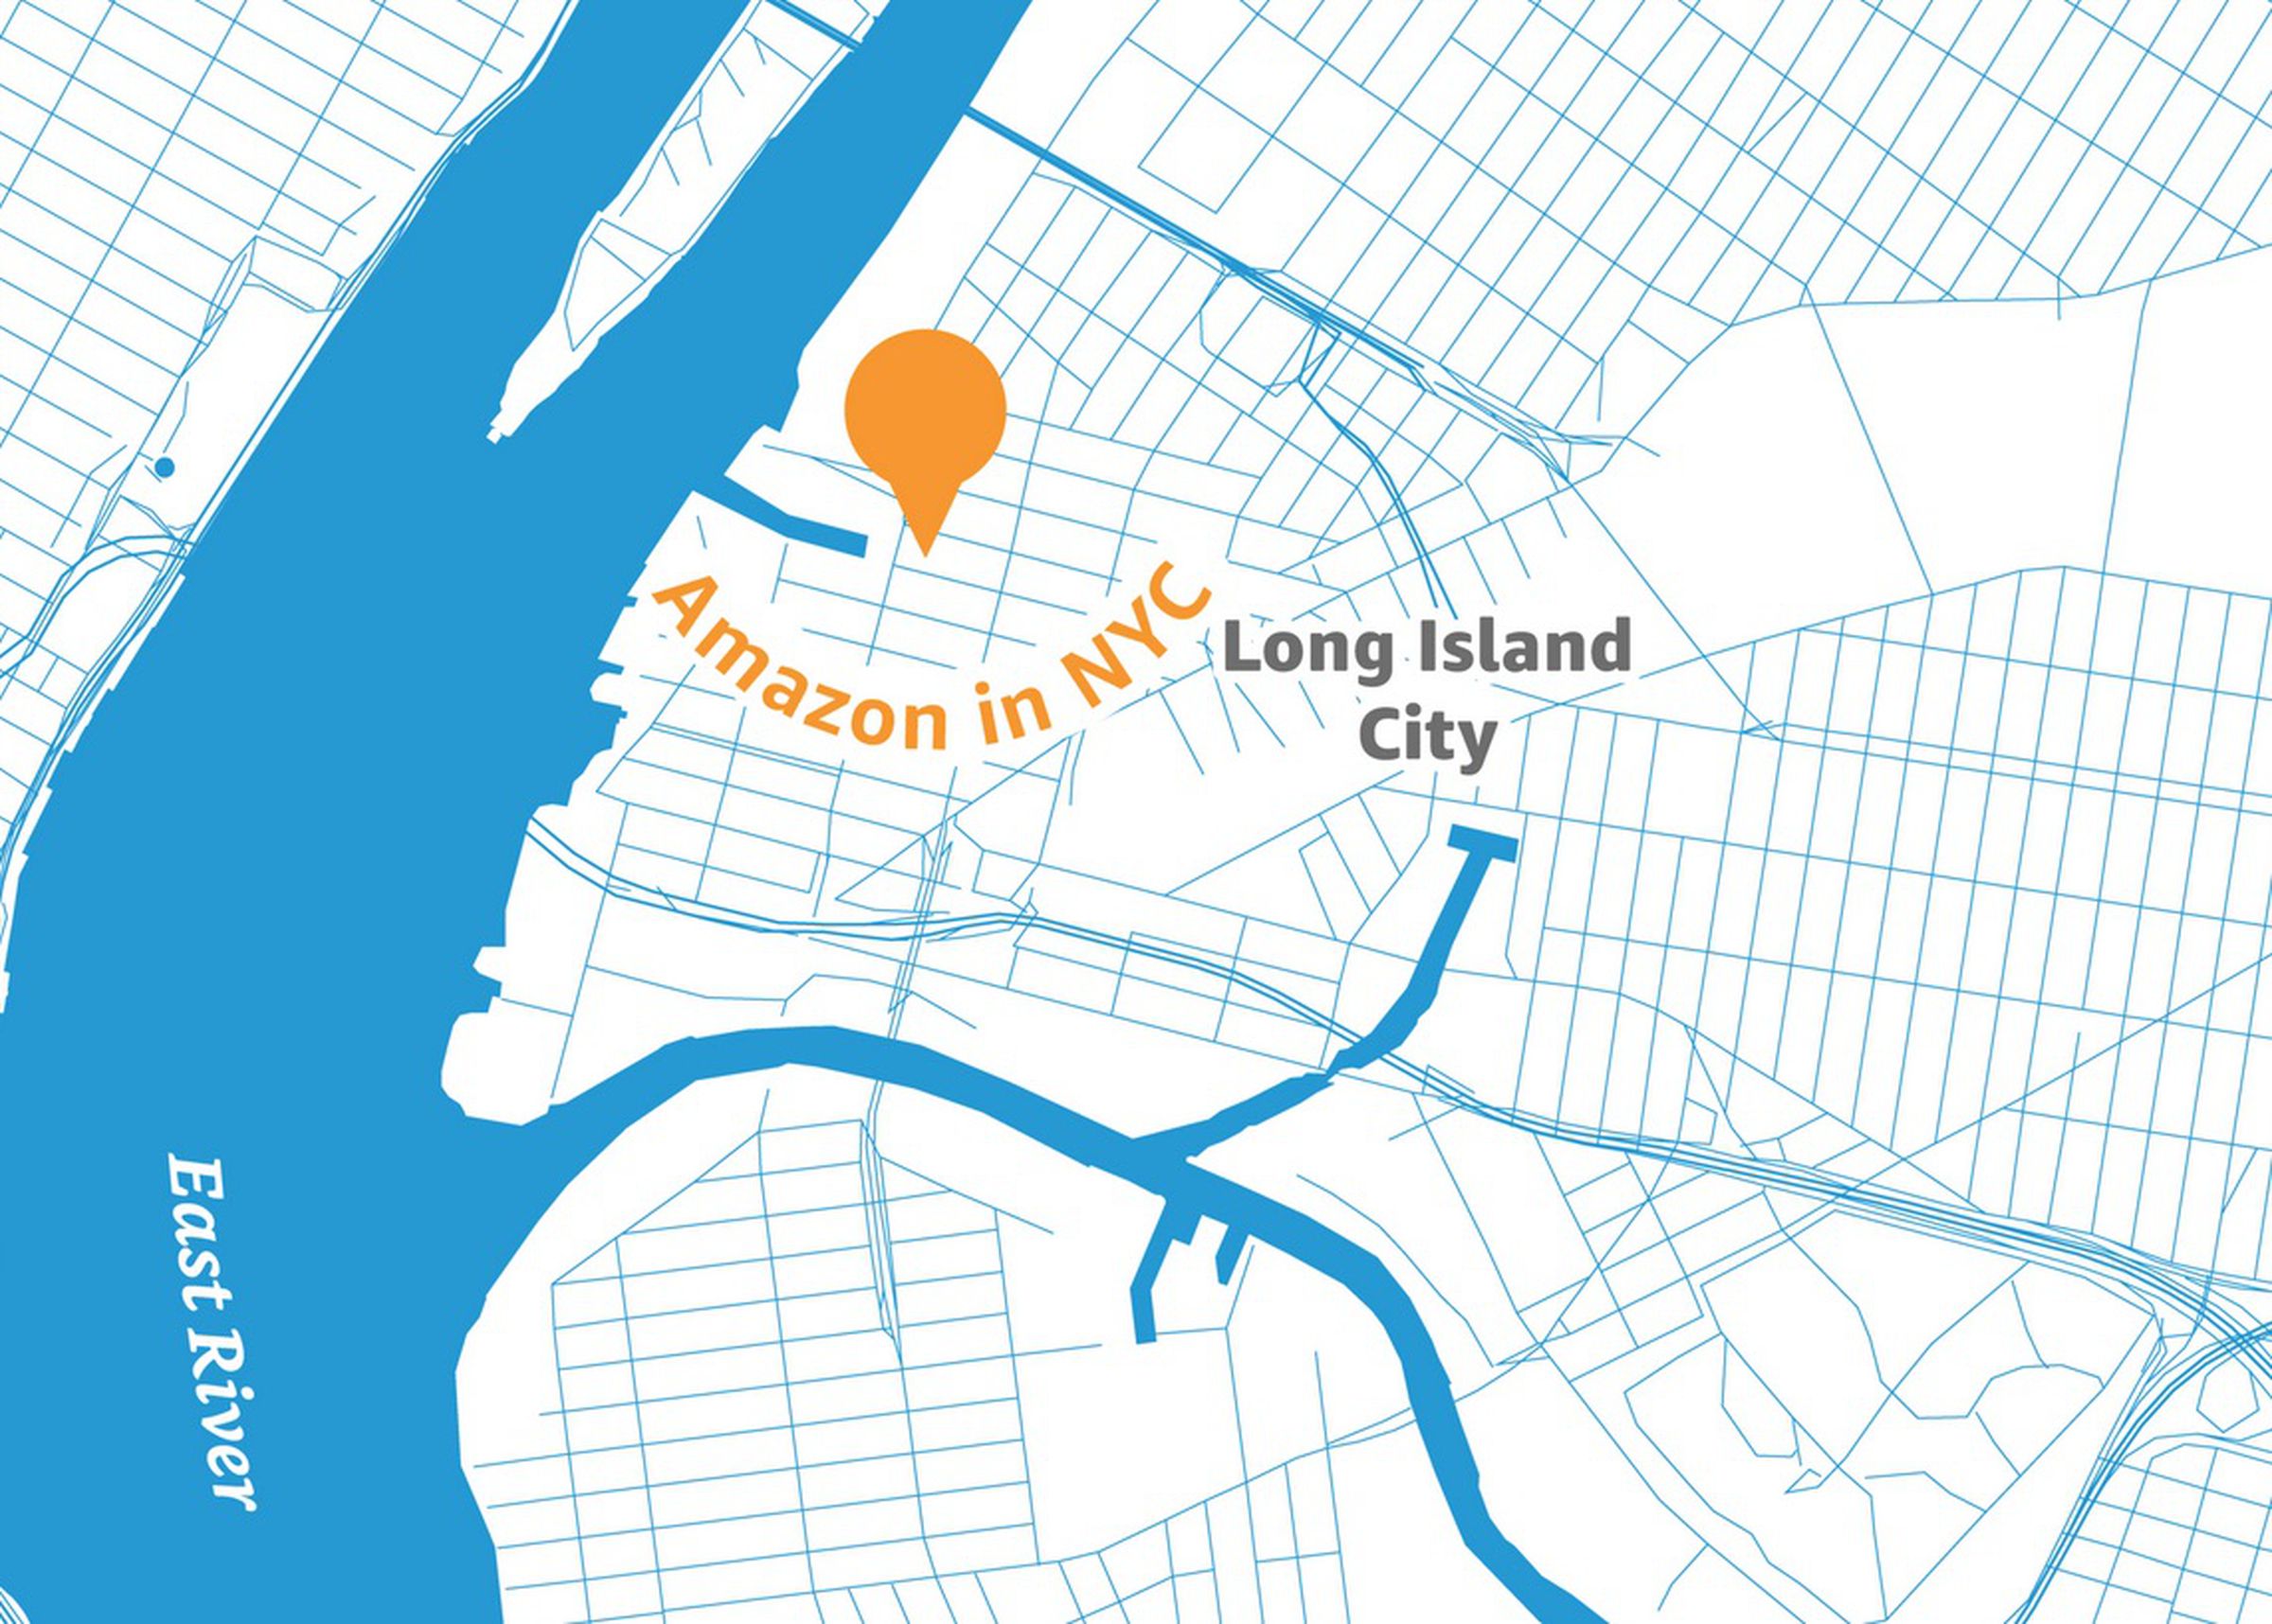 Amazon’s HQ2 site in Long Island City.